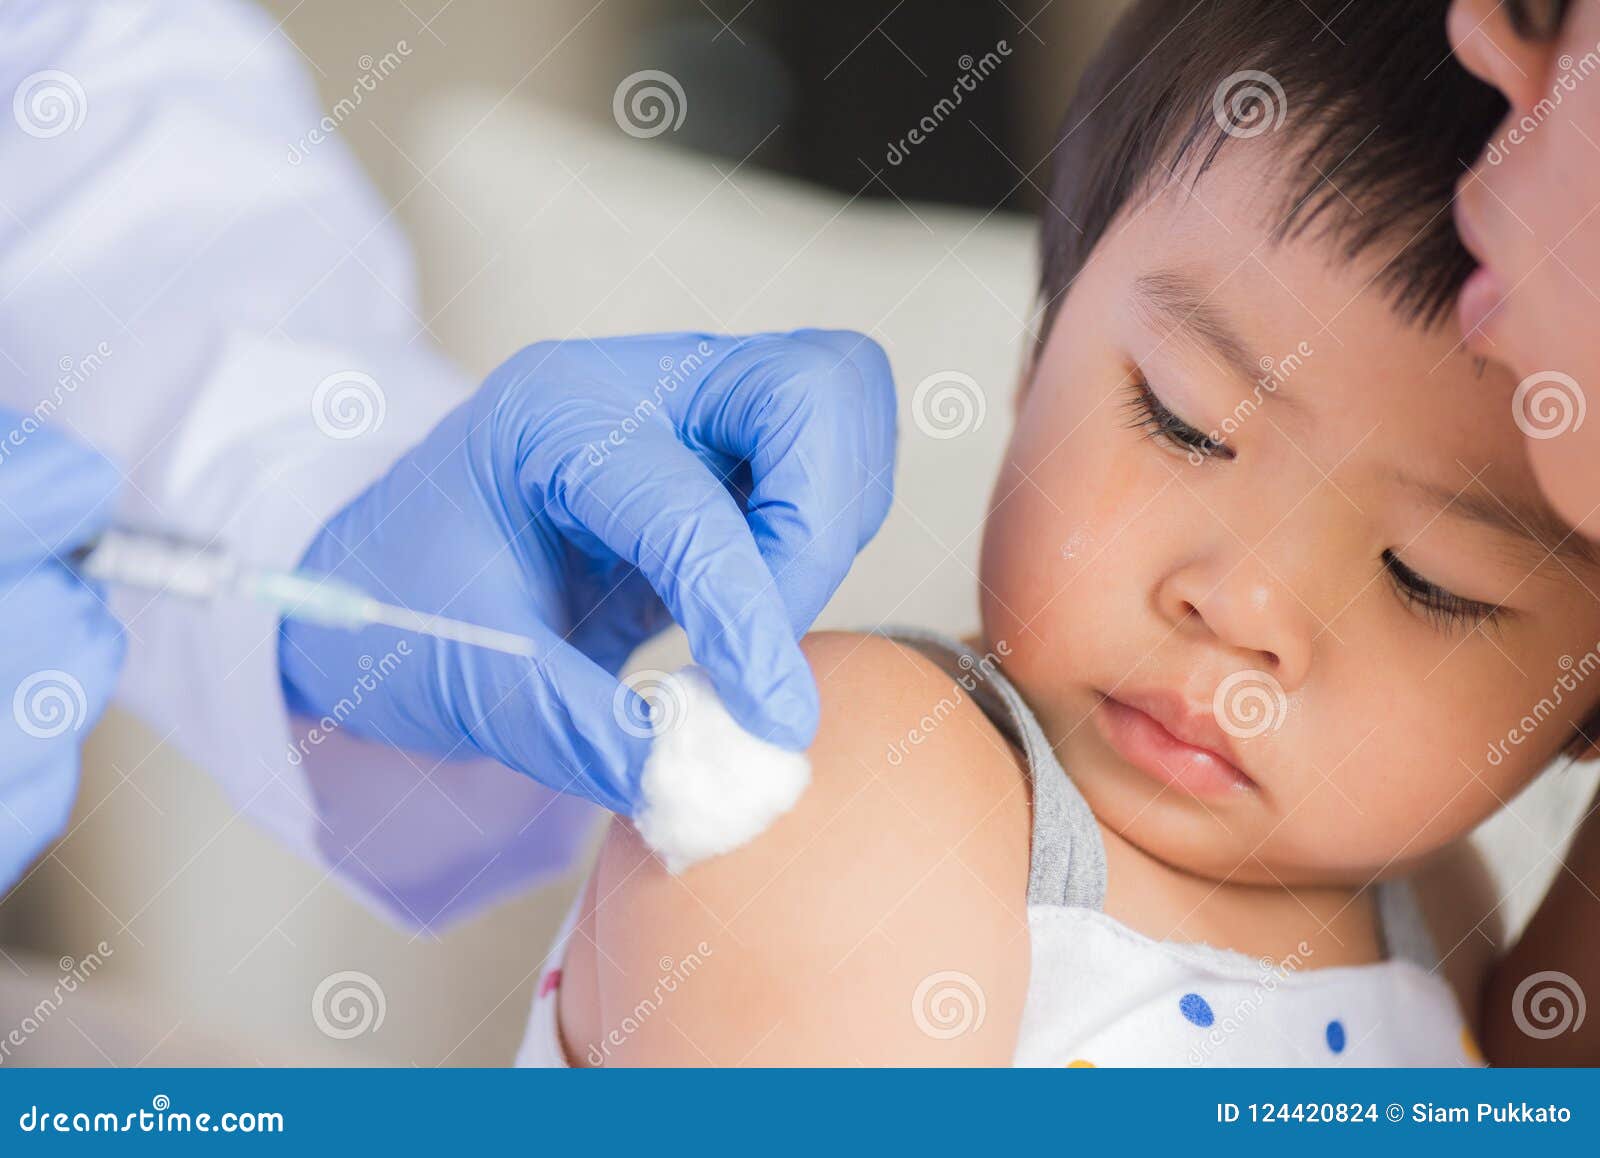 doctor giving an injection vaccine to a girl.